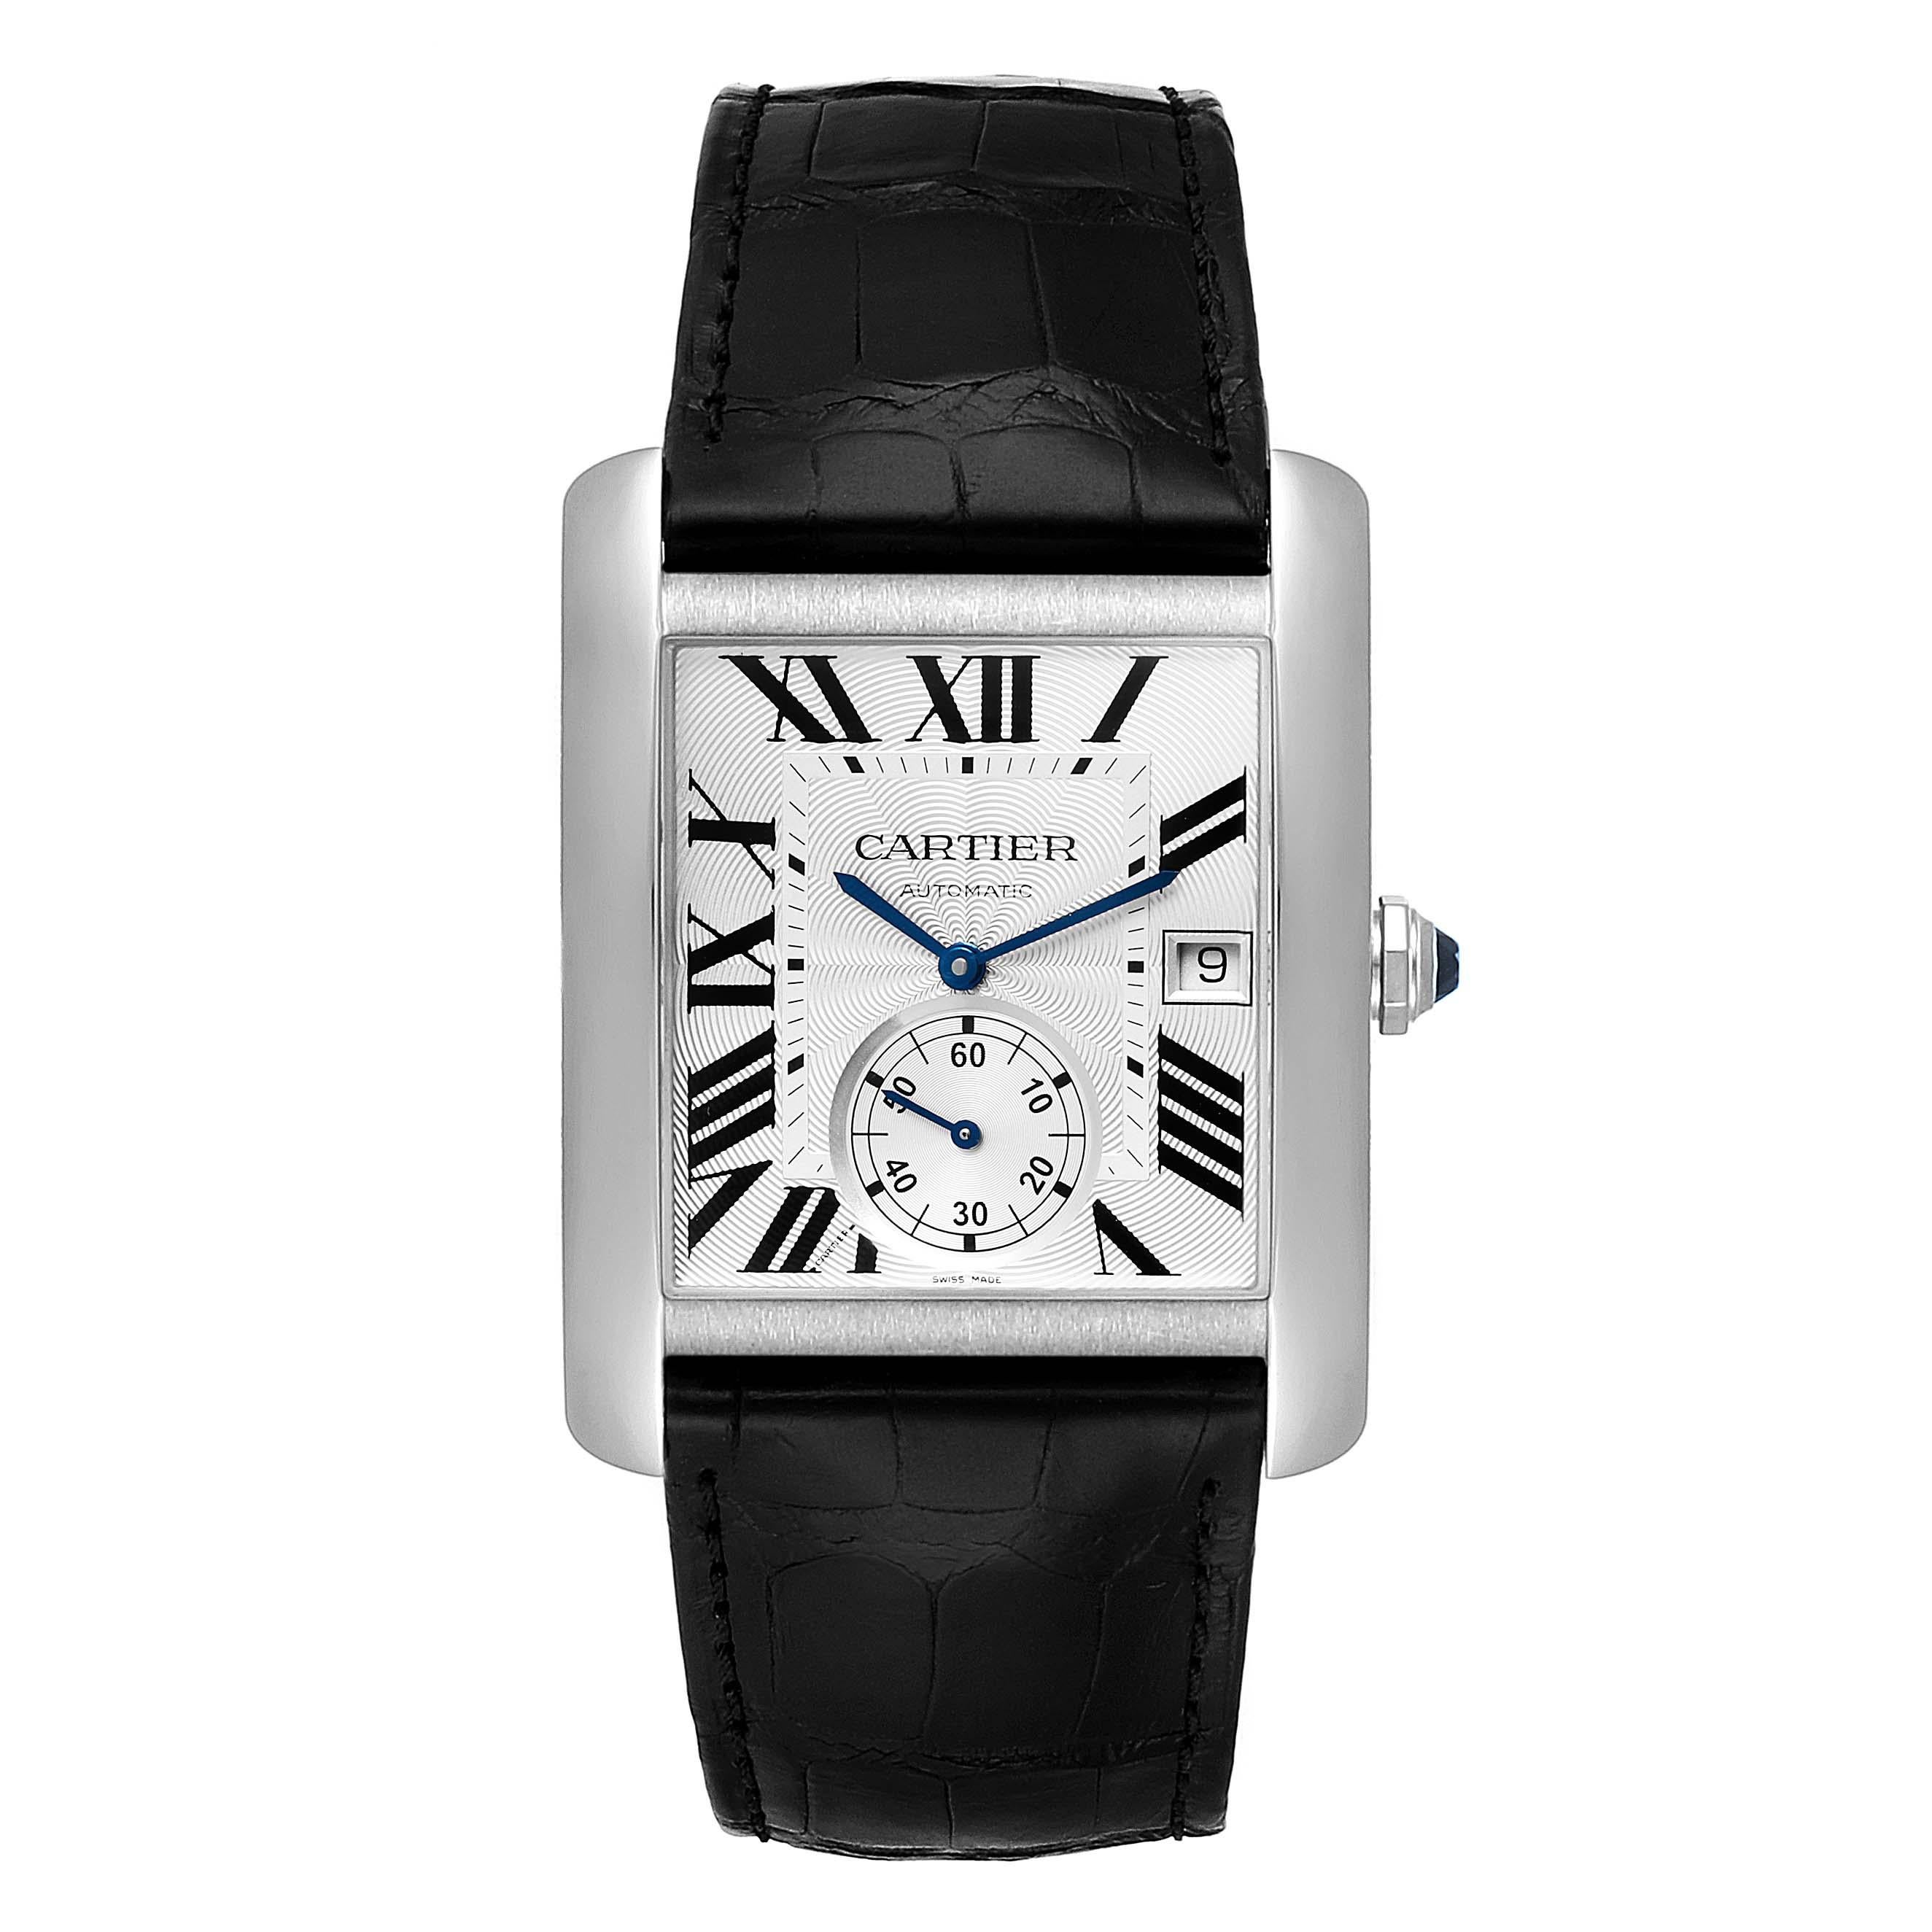 Cartier Tank MC Silver Dial Steel Mens Watch W5330003 Box Card. Automatic self-winding movement caliber 1904-PS. Three body brushed stainless steel case 34.3 x 44.0 mm. Protected octagonal crown set with the faceted blue spinel. Exhibition case